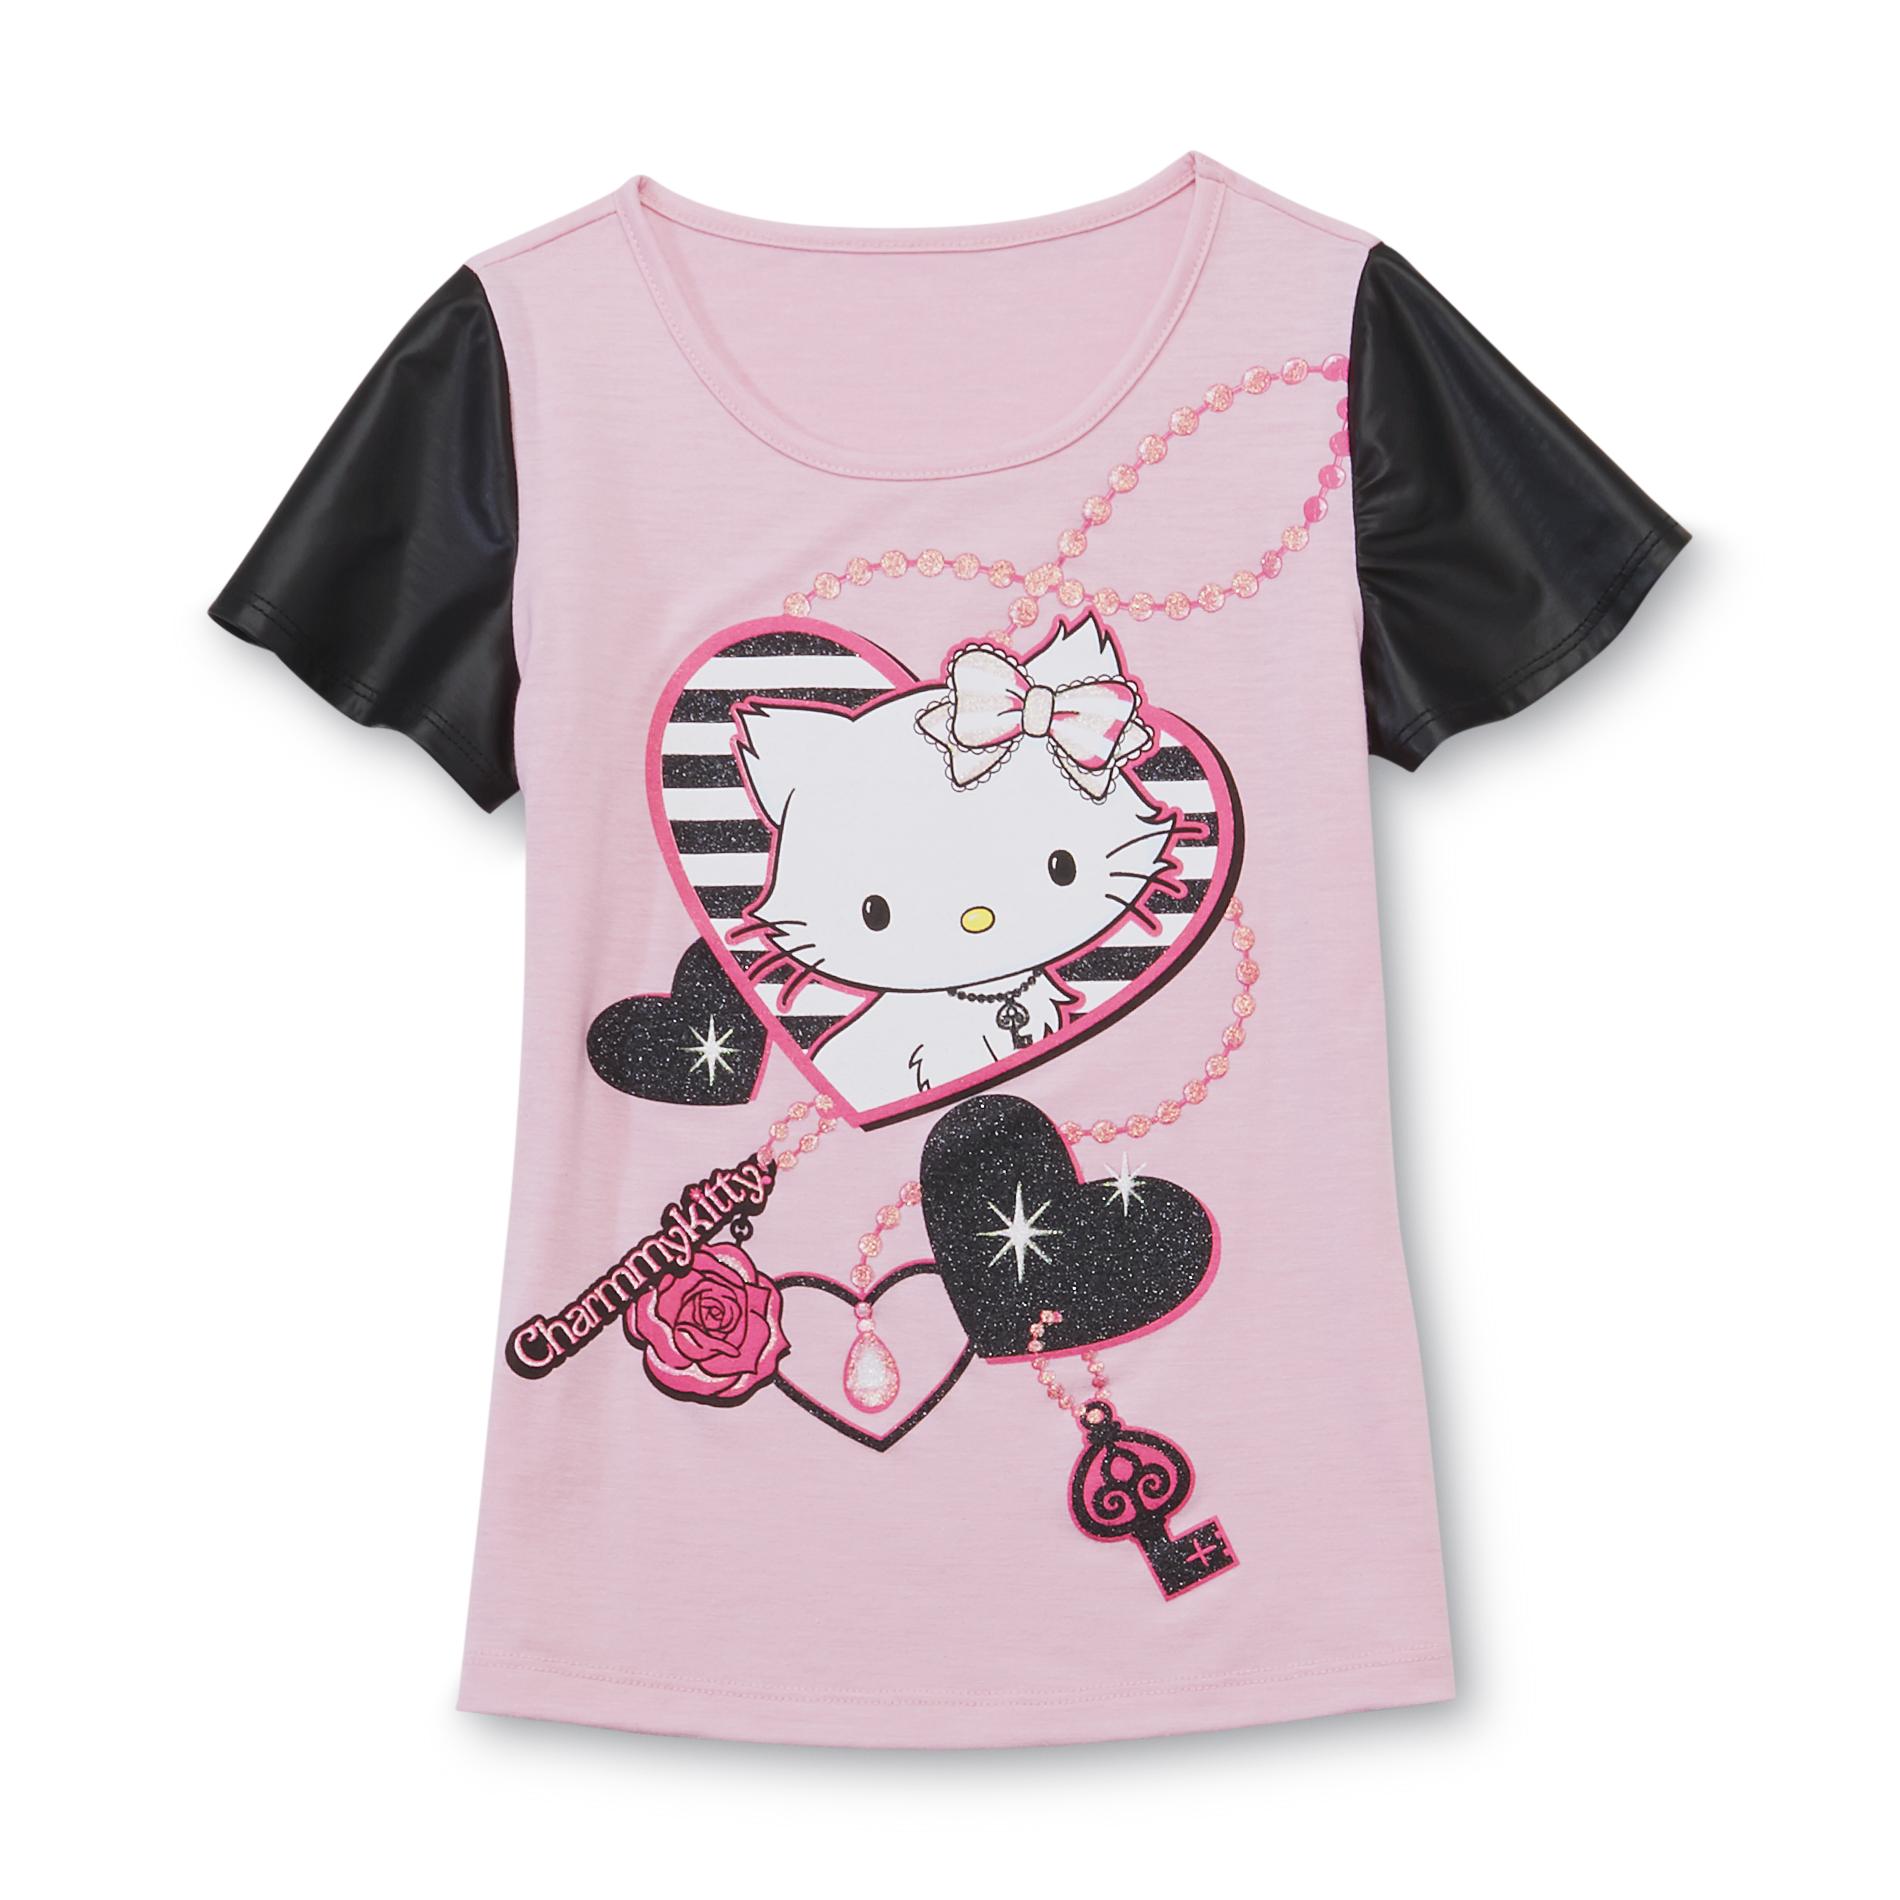 Hello Kitty Girl's Graphic T-Shirt - Charmmy Kitty